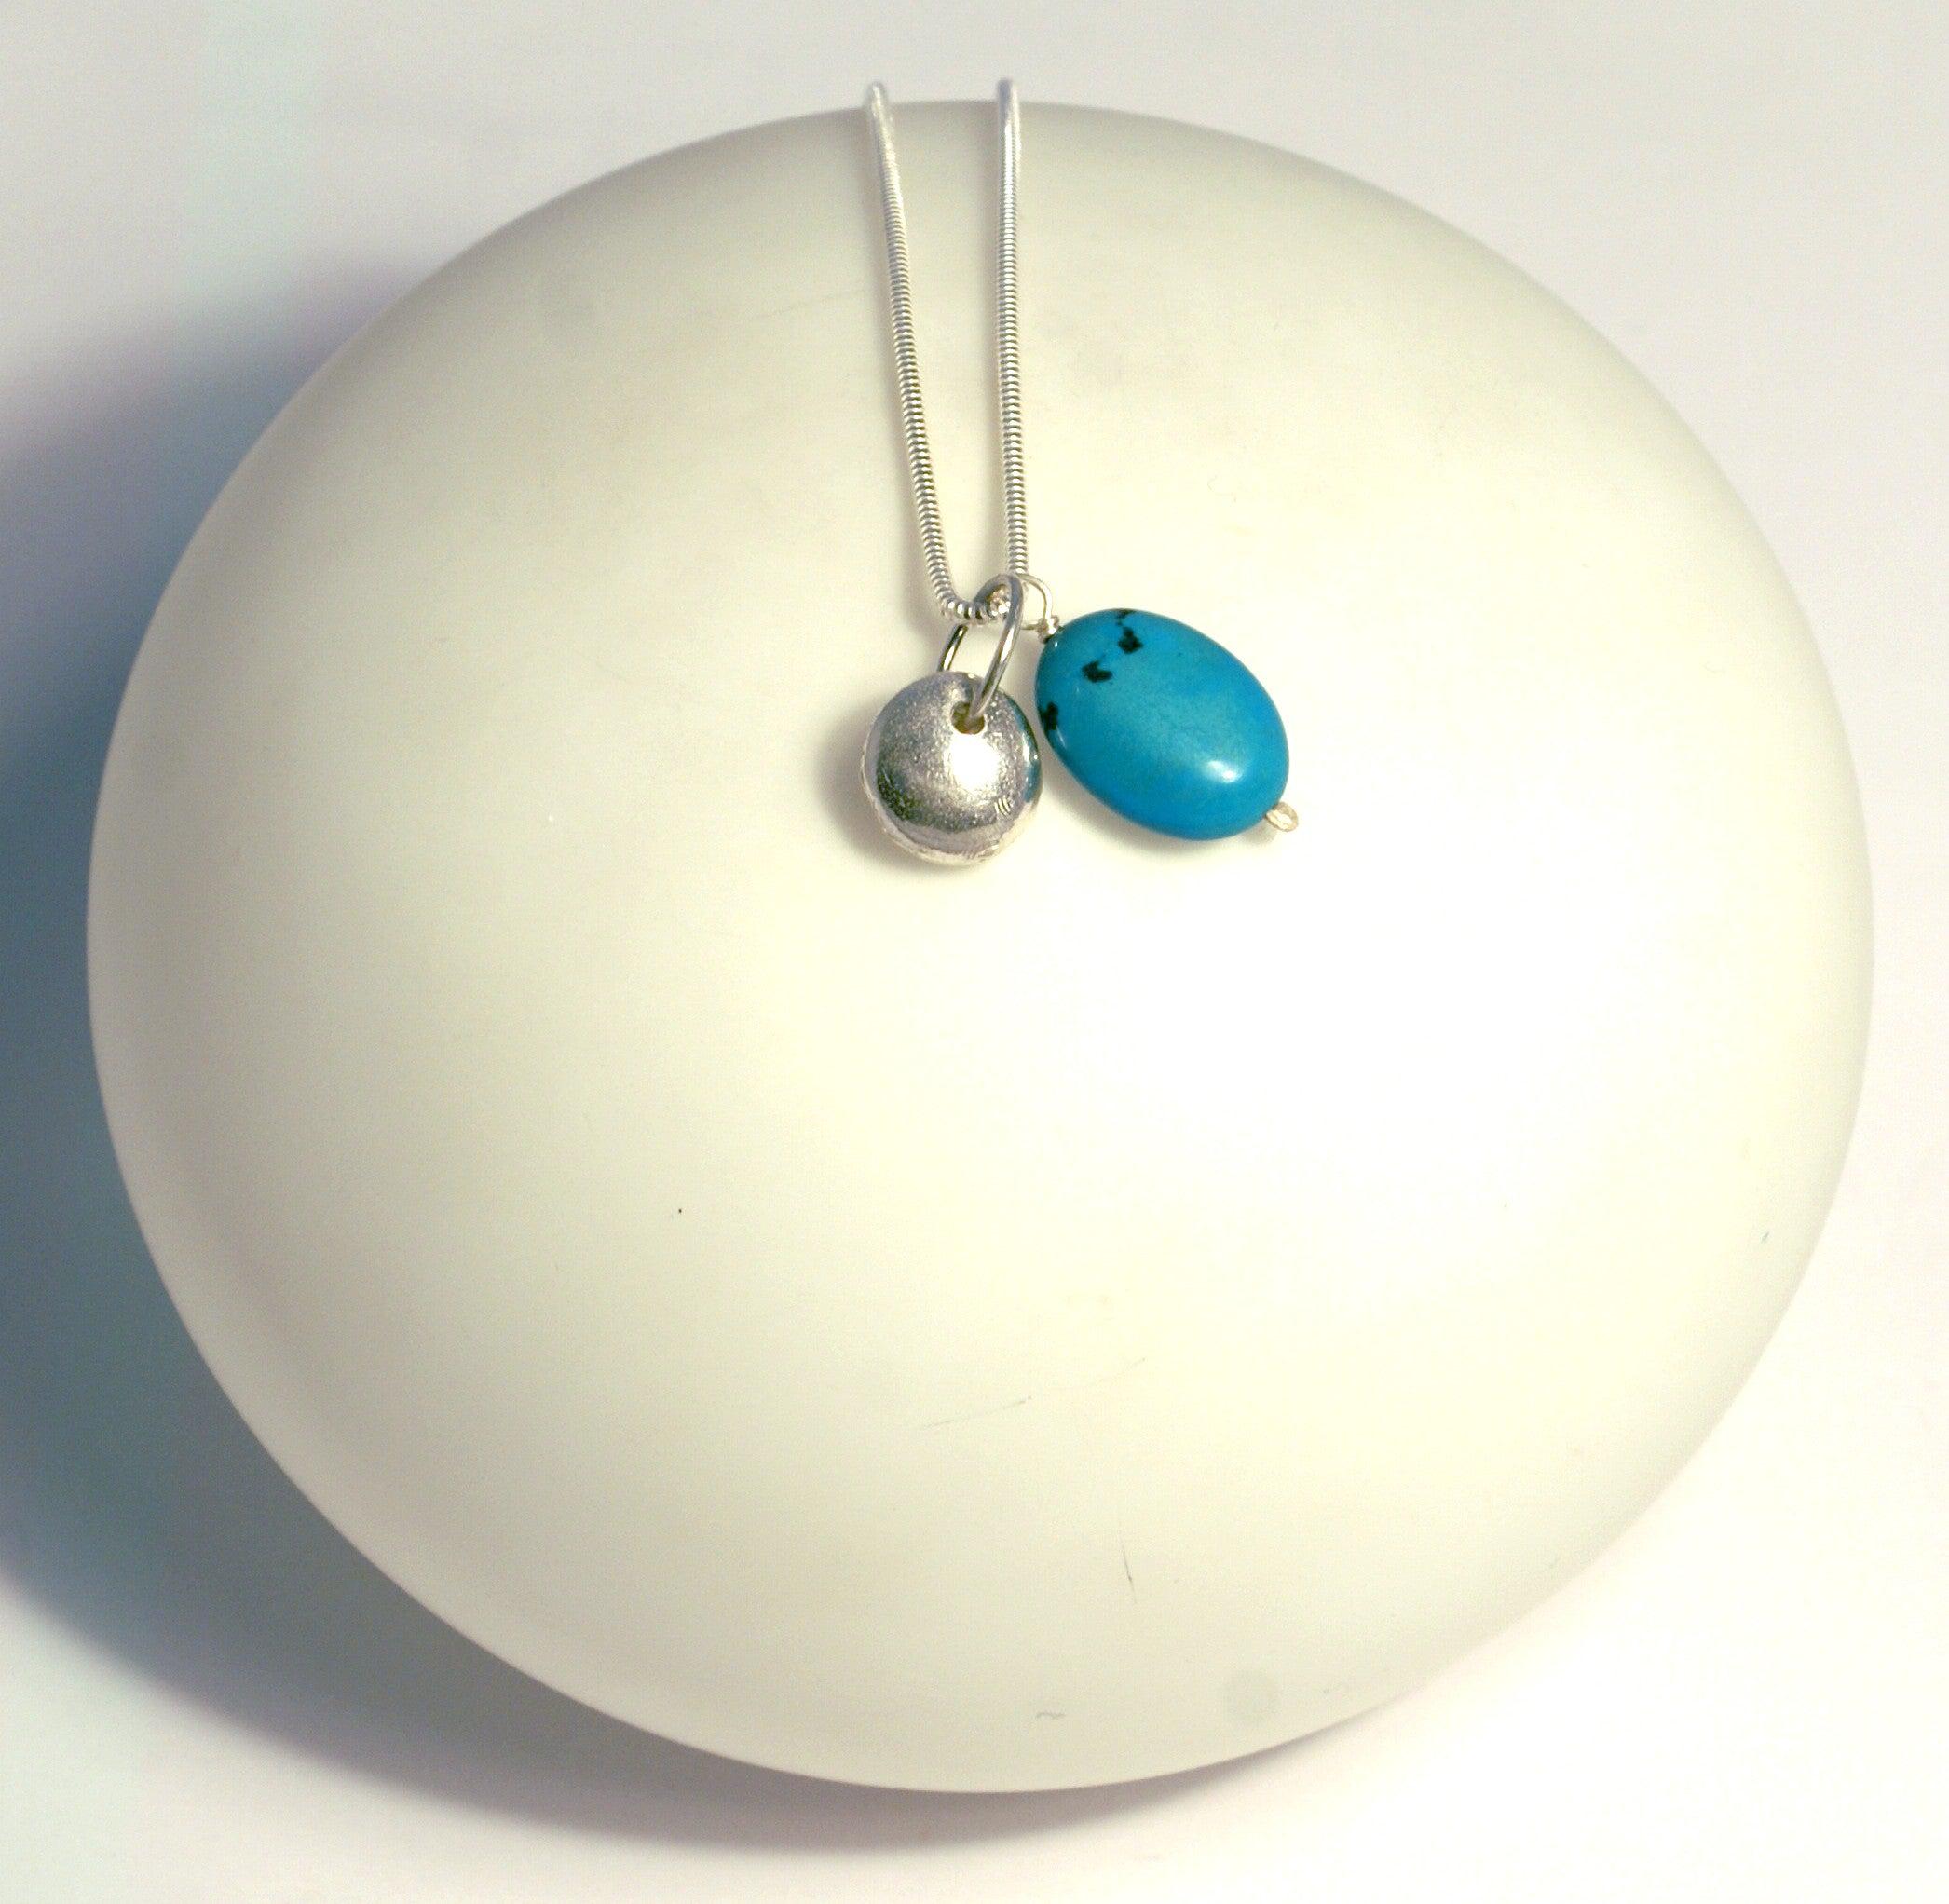 Nugget & Turquoise Pendant - The Nancy Smillie Shop - Art, Jewellery & Designer Gifts Glasgow